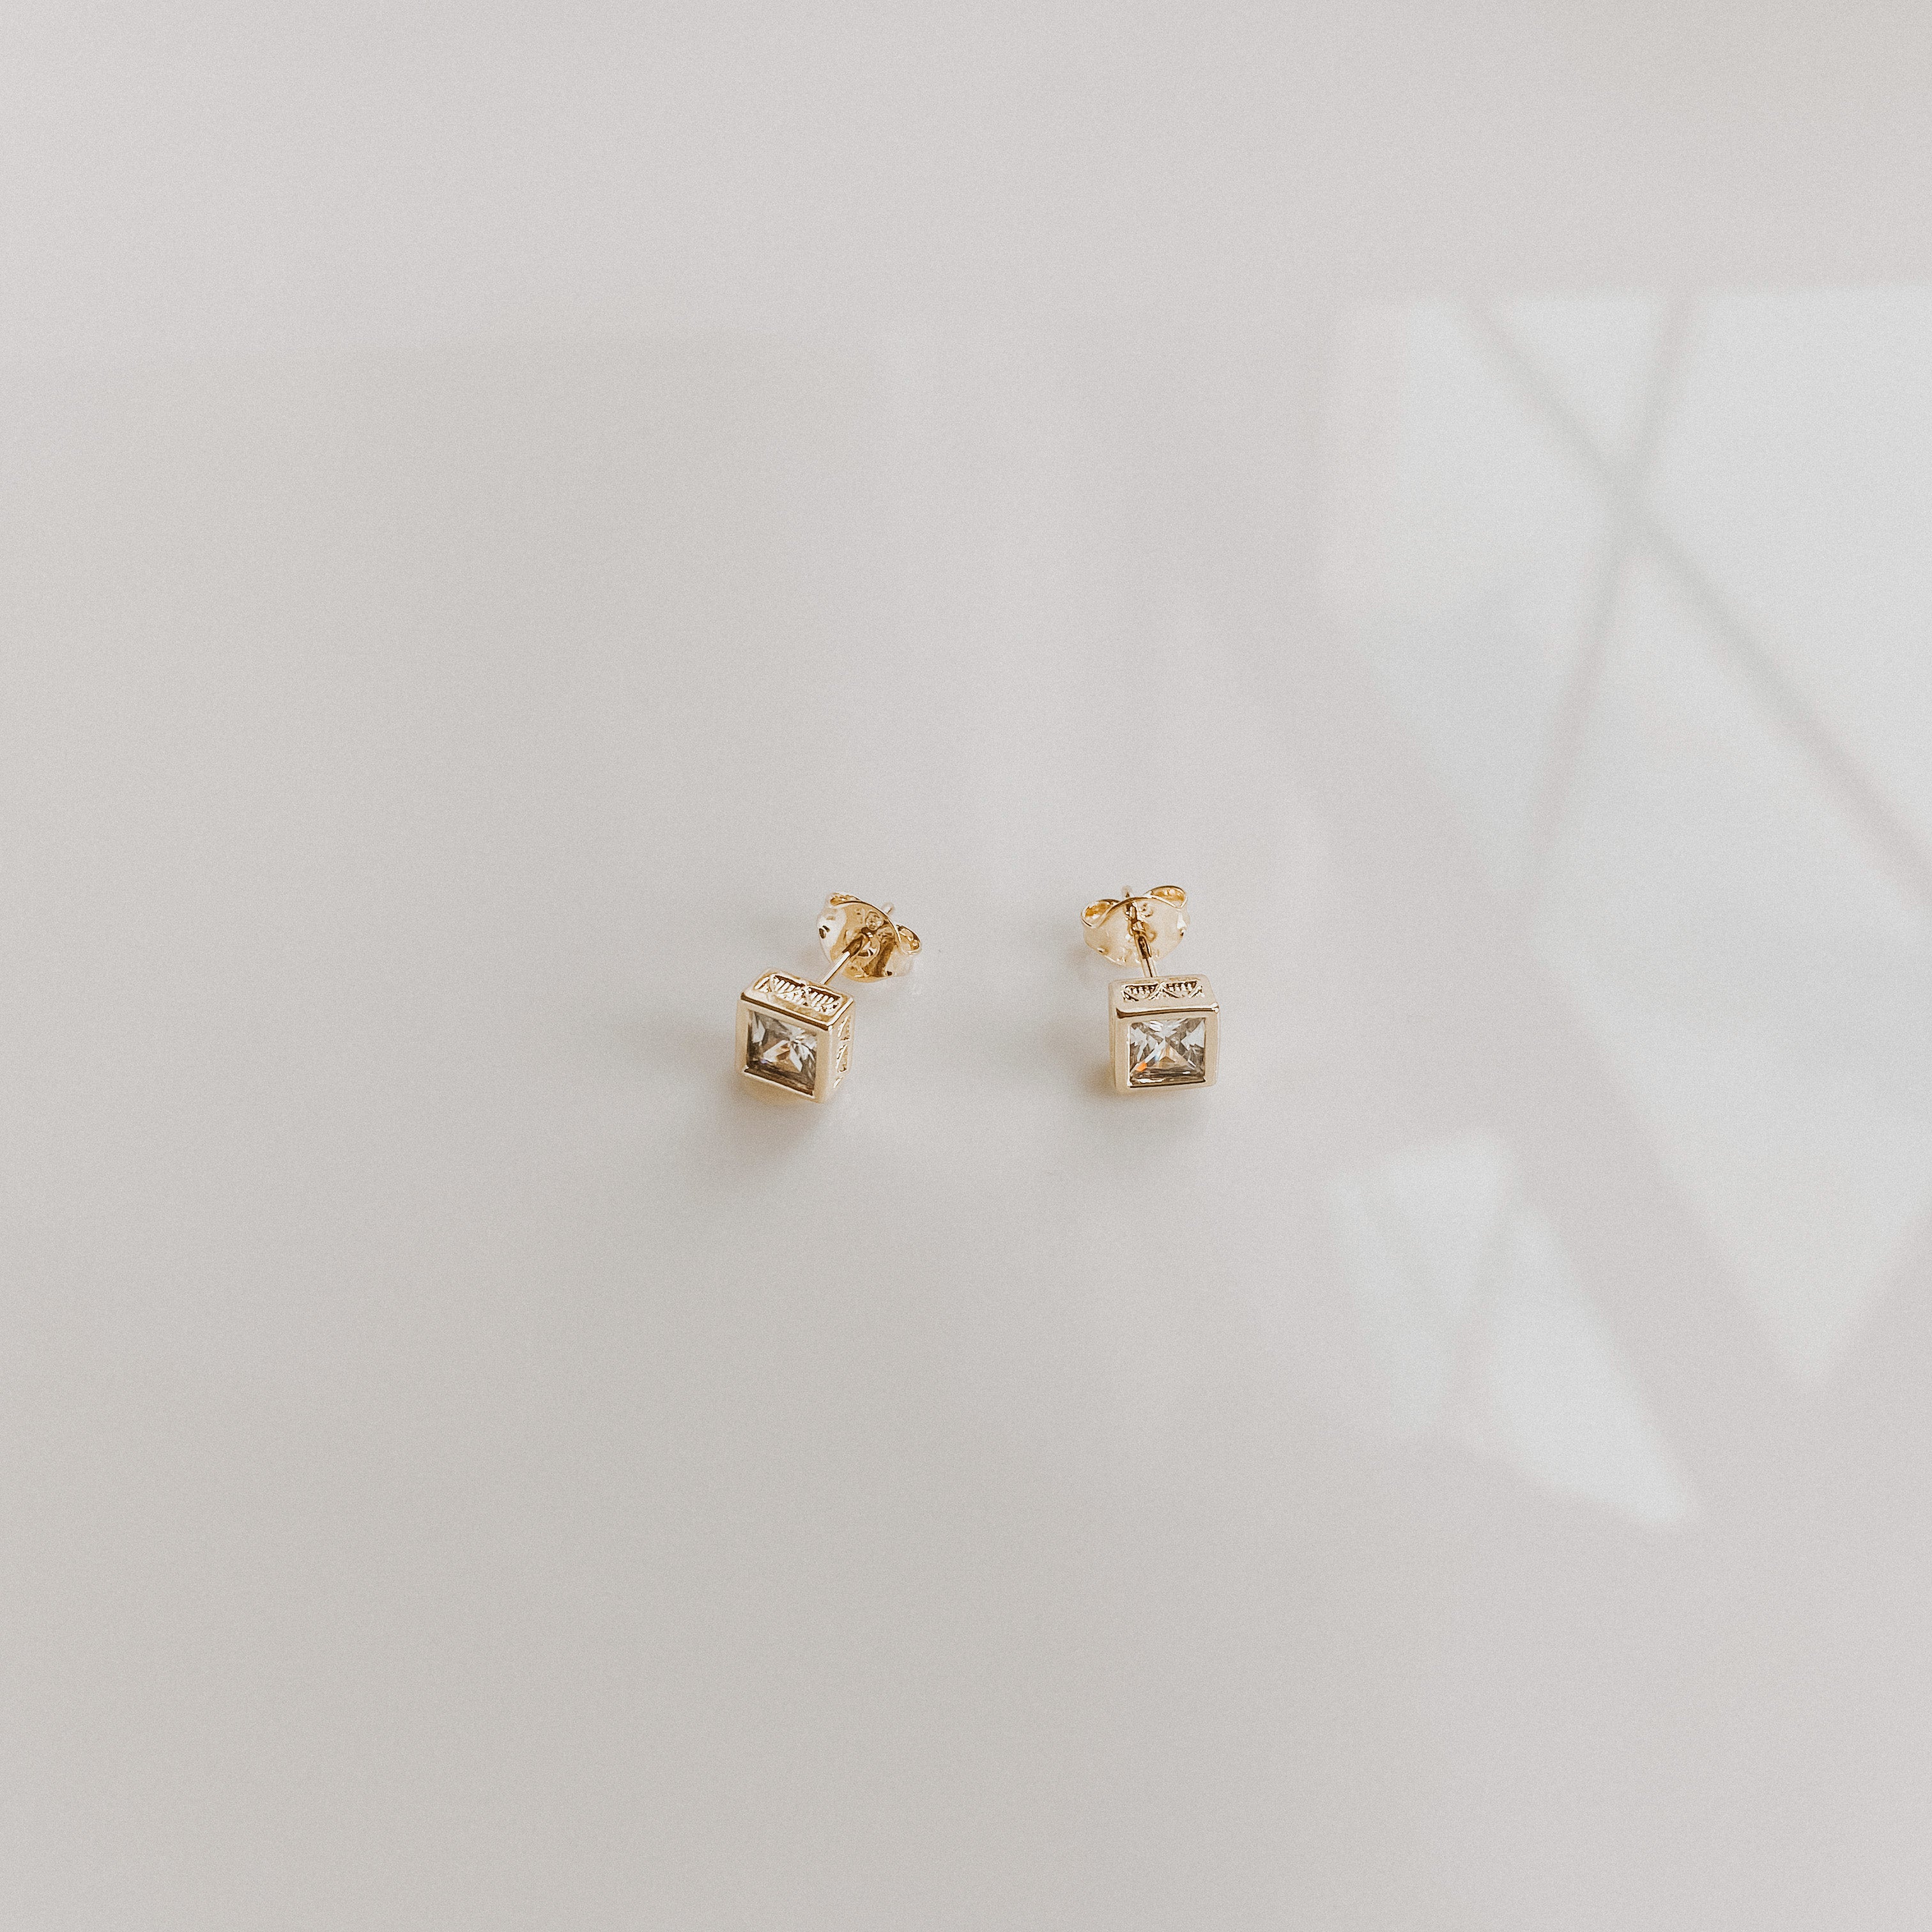 Stella Square Stud Earrings 18k Gold Filled - Kate Gates Jewelry